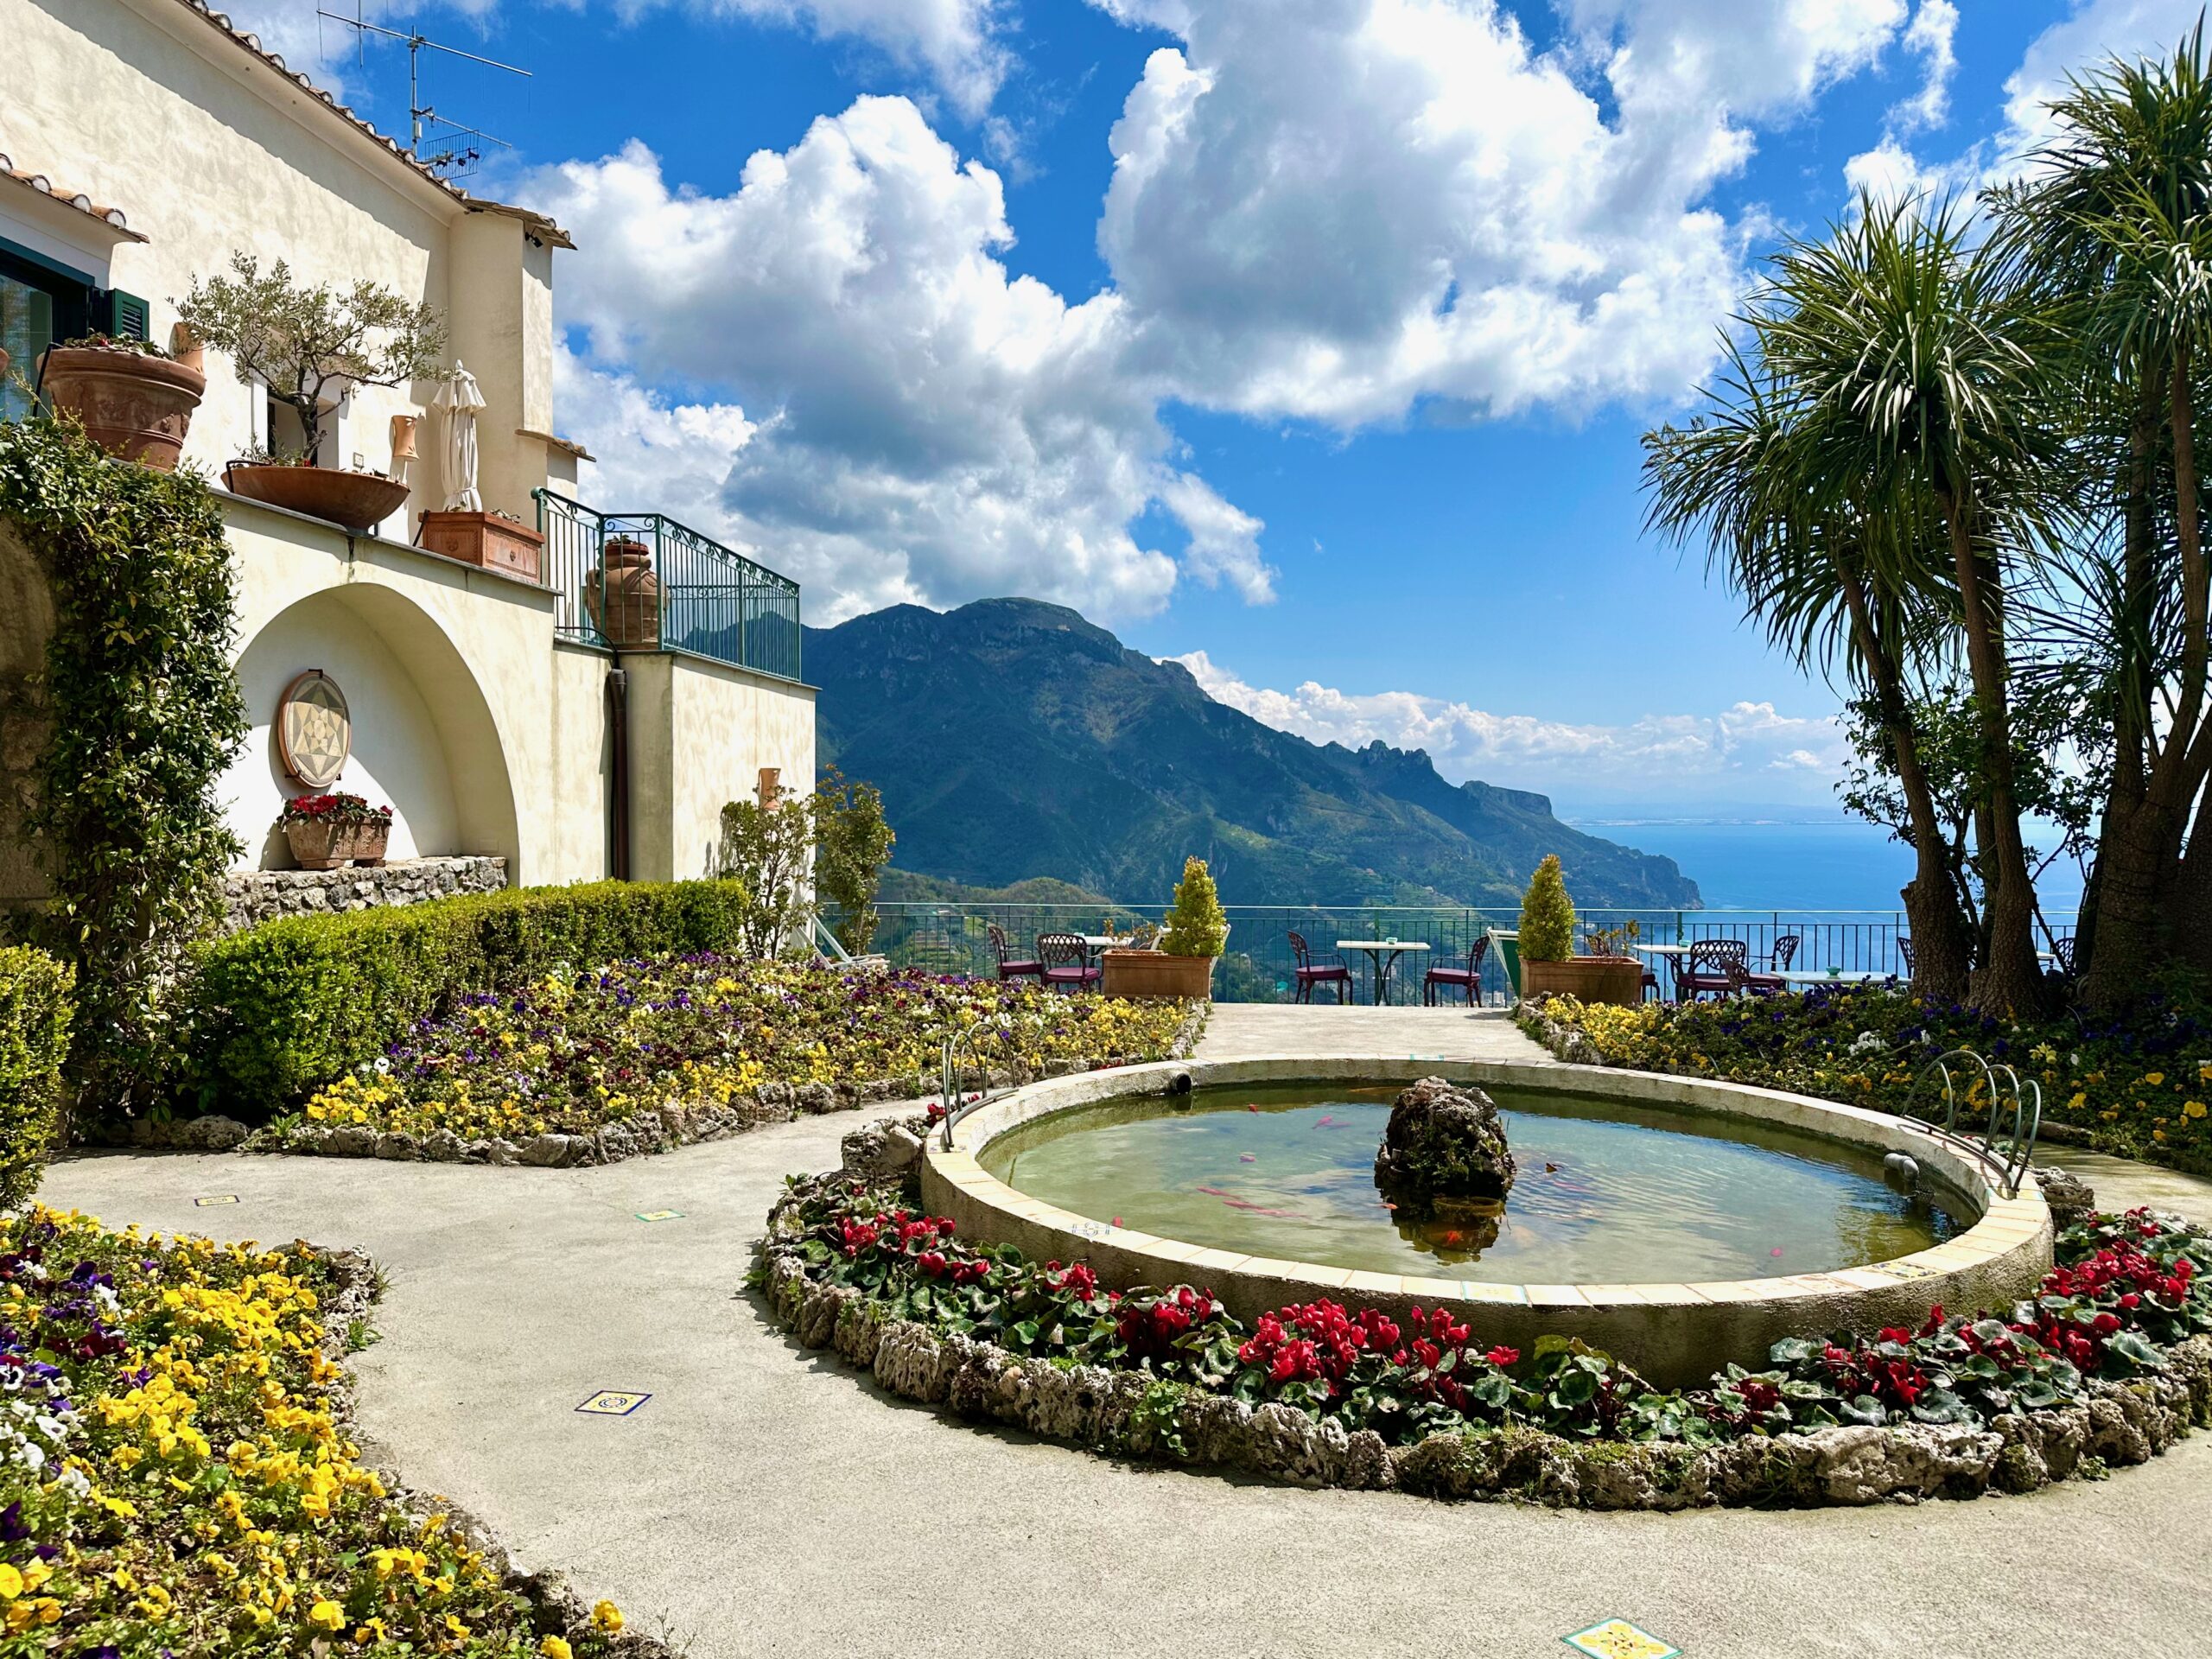 Garden in bloom with a koi pond and view to the sea and mountains at Parsifal hotel in Ravello on the Amalfi Coast